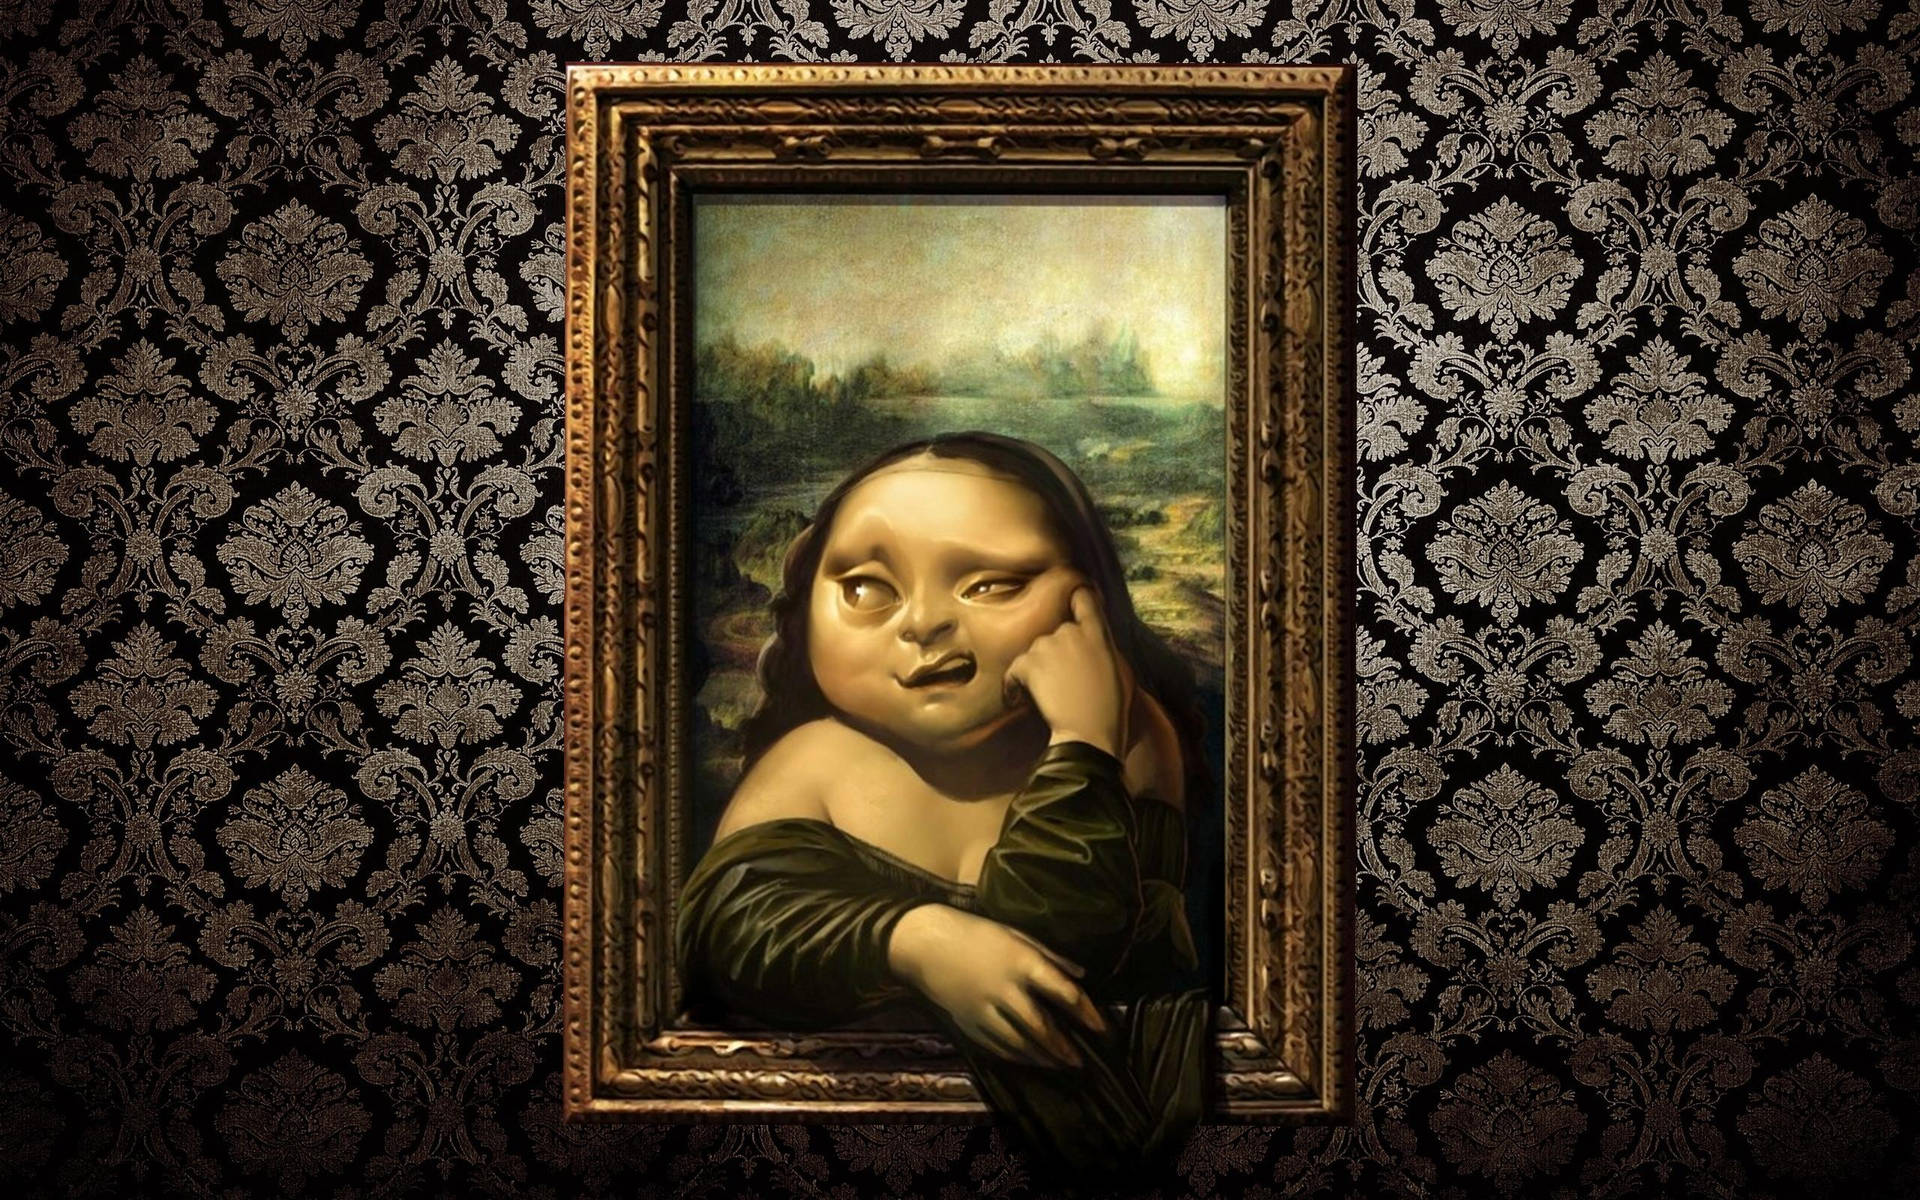 A painting of a woman with a large head and small body. - Mona Lisa